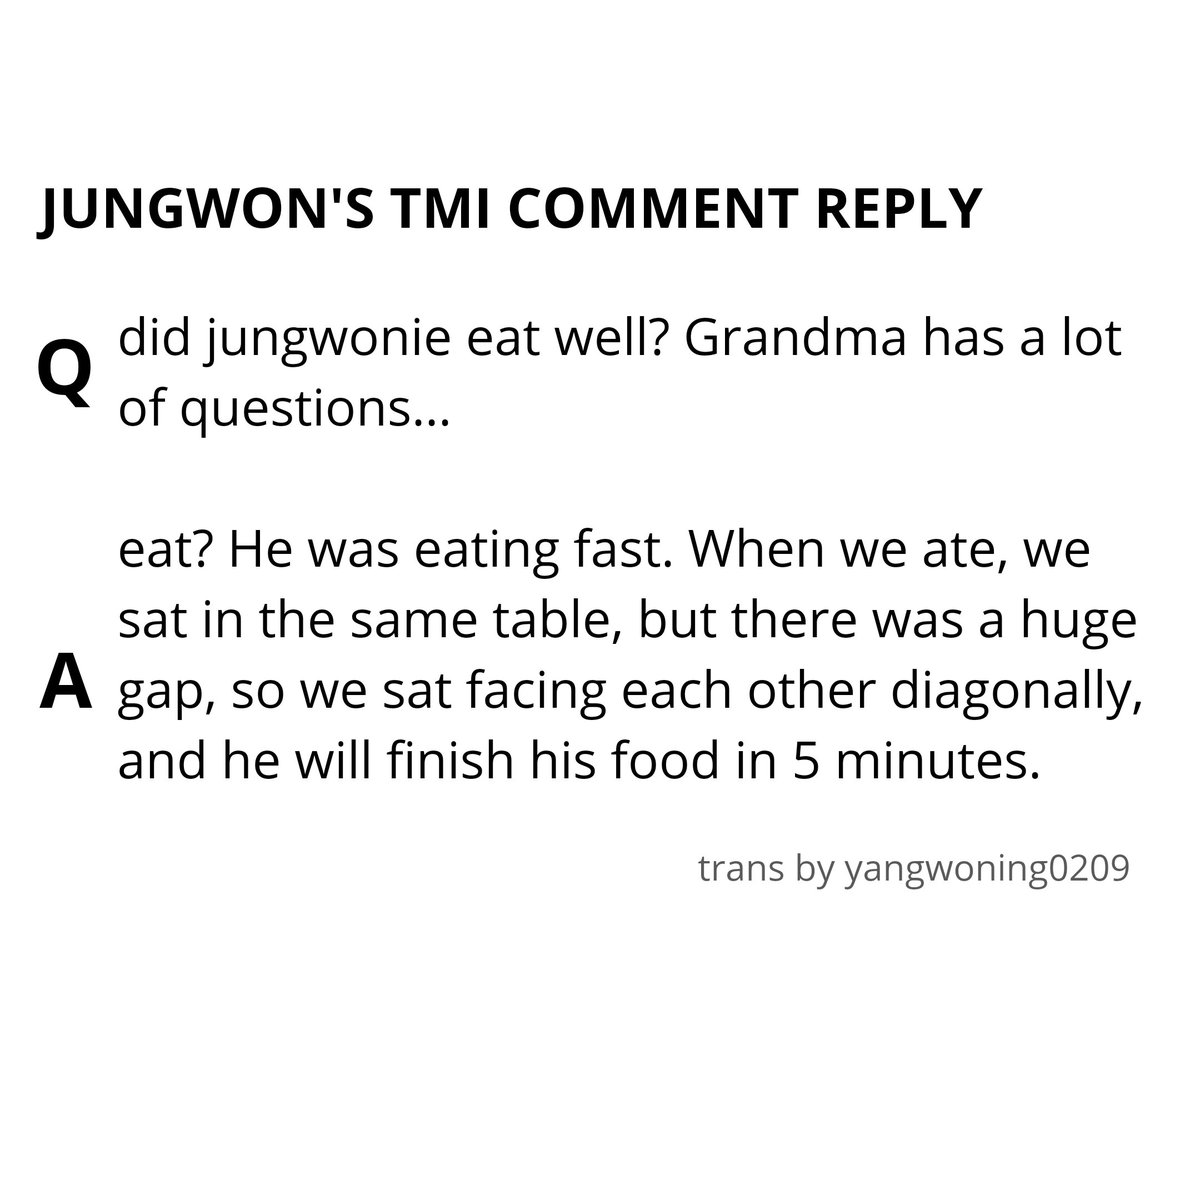 [10] Jungwonie is a good eater